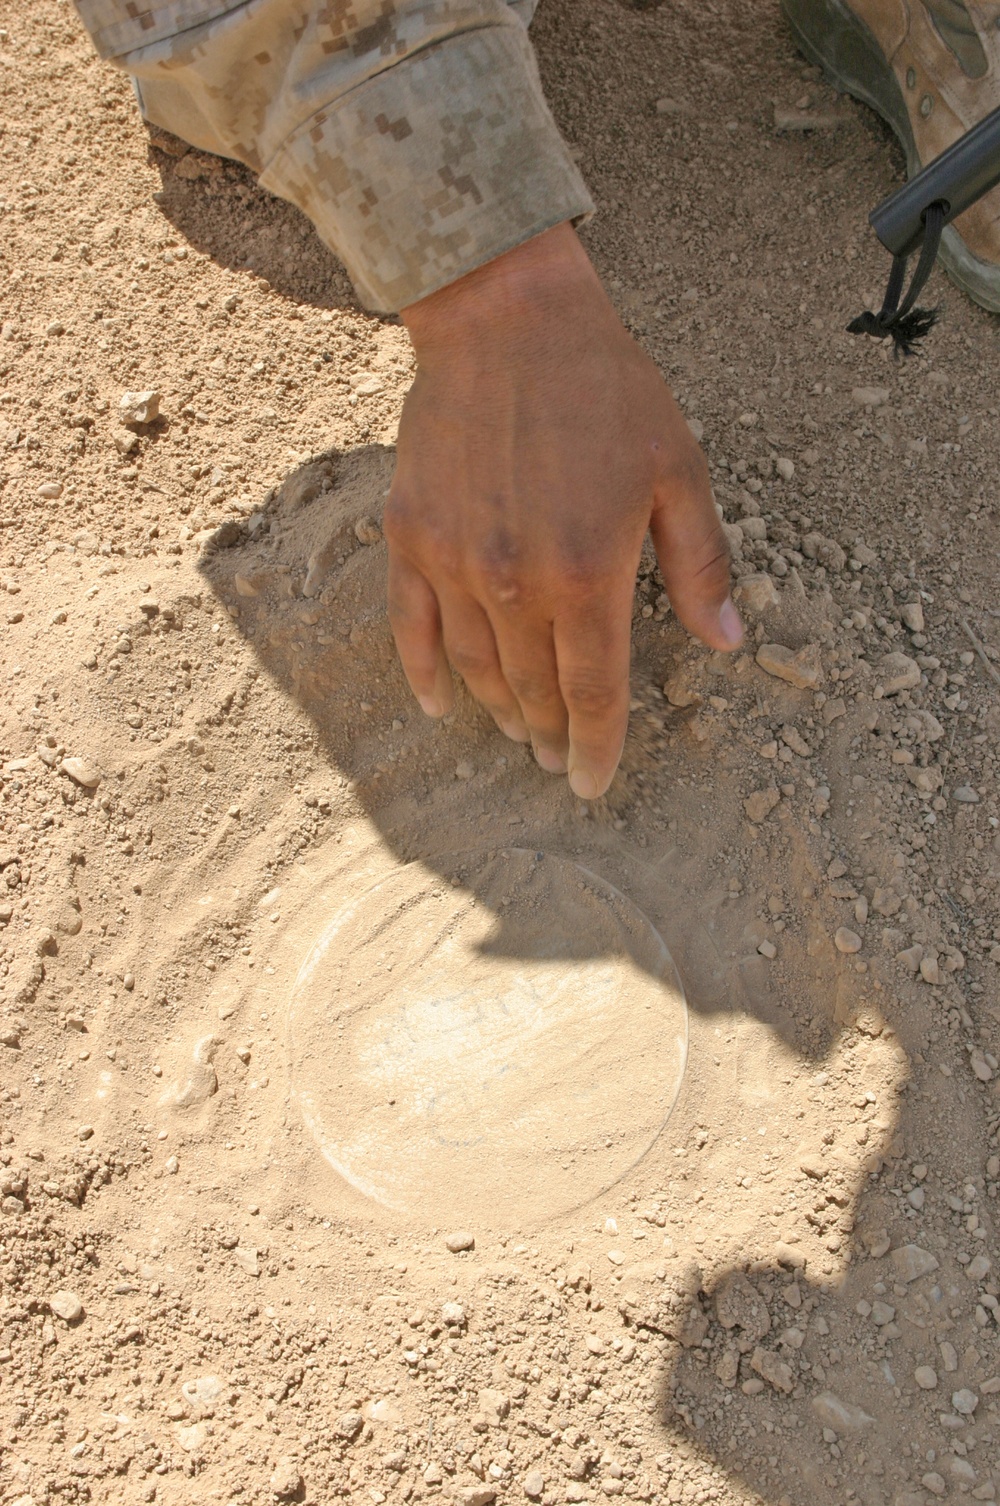 PFC Wollam demonstrates probing and uncovering mines